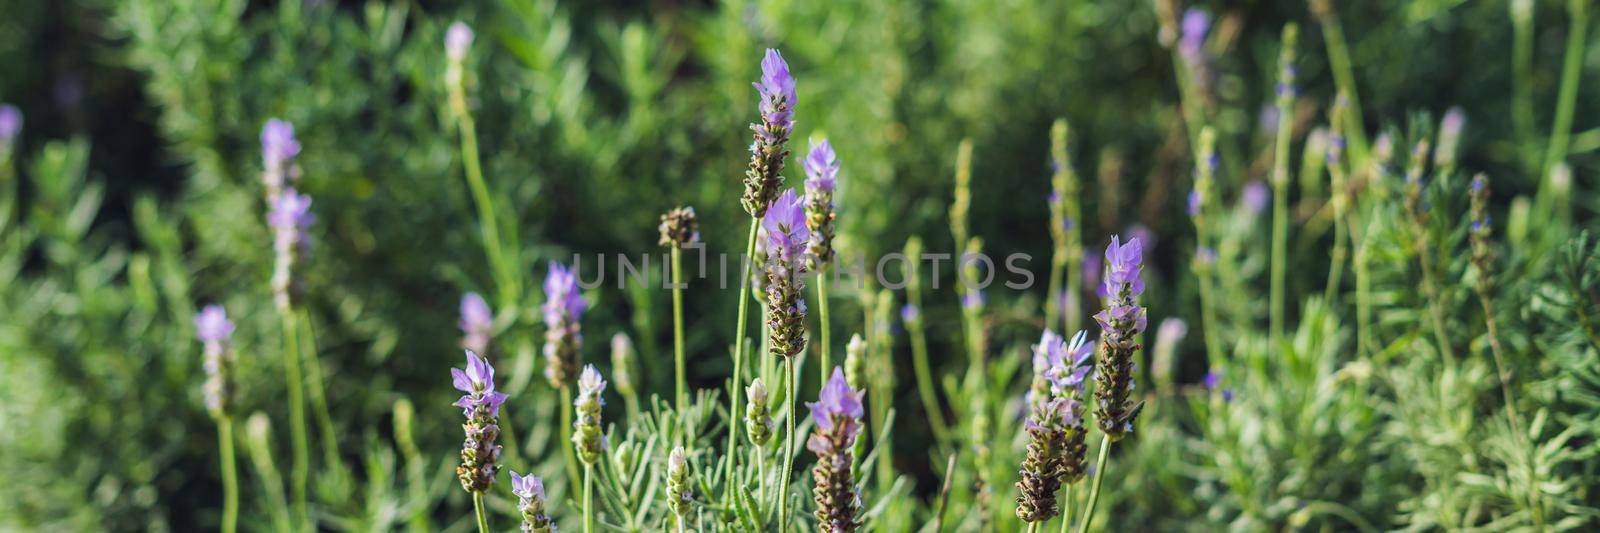 Lavender flowers at sunlight in a soft focus, pastel colors and blur background. BANNER long format